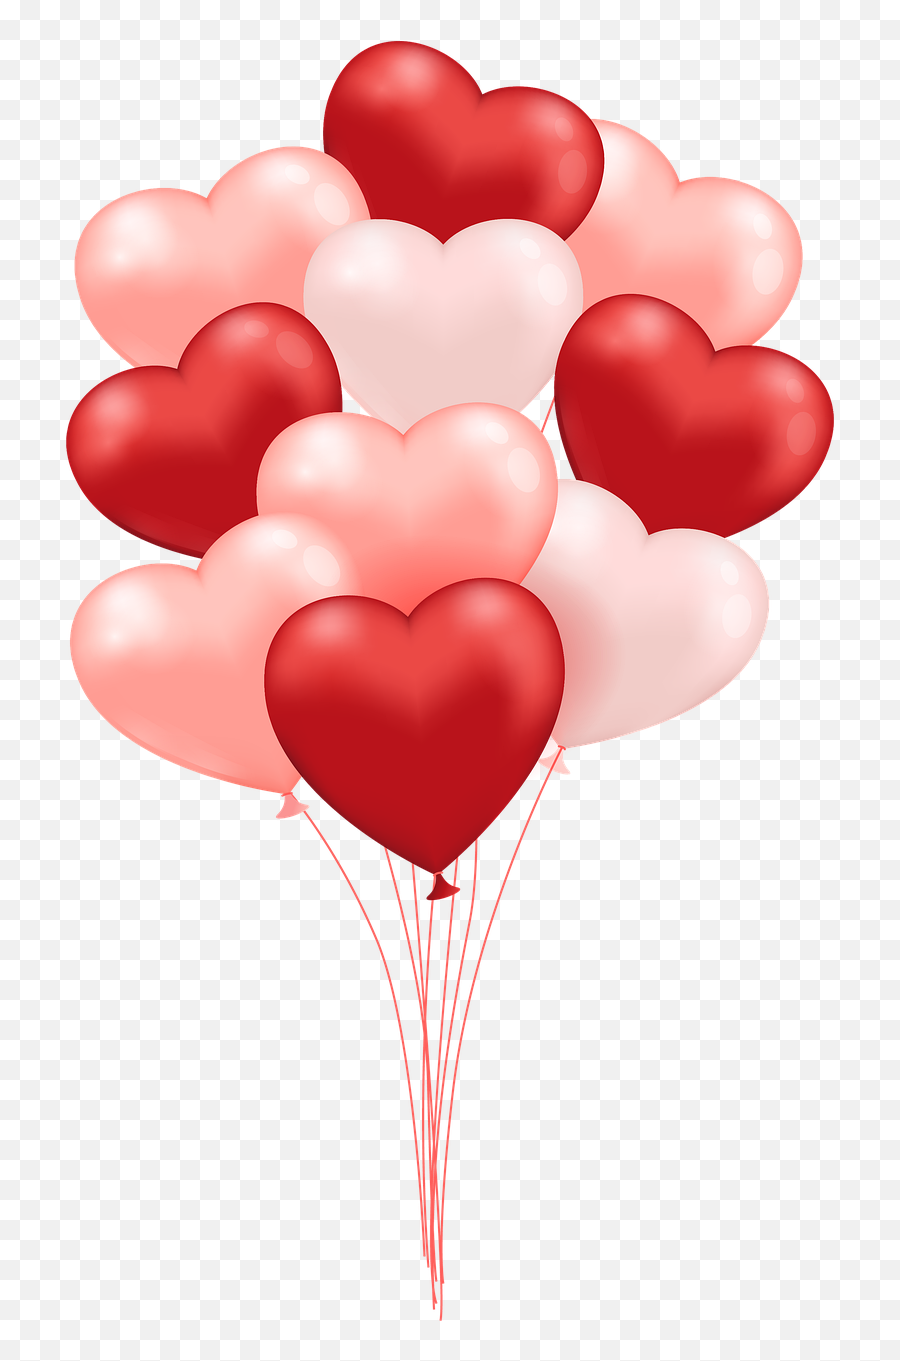 Valentine Balloons Heart - Free Image On Pixabay Ballon Herz Png,Heart Balloon Png